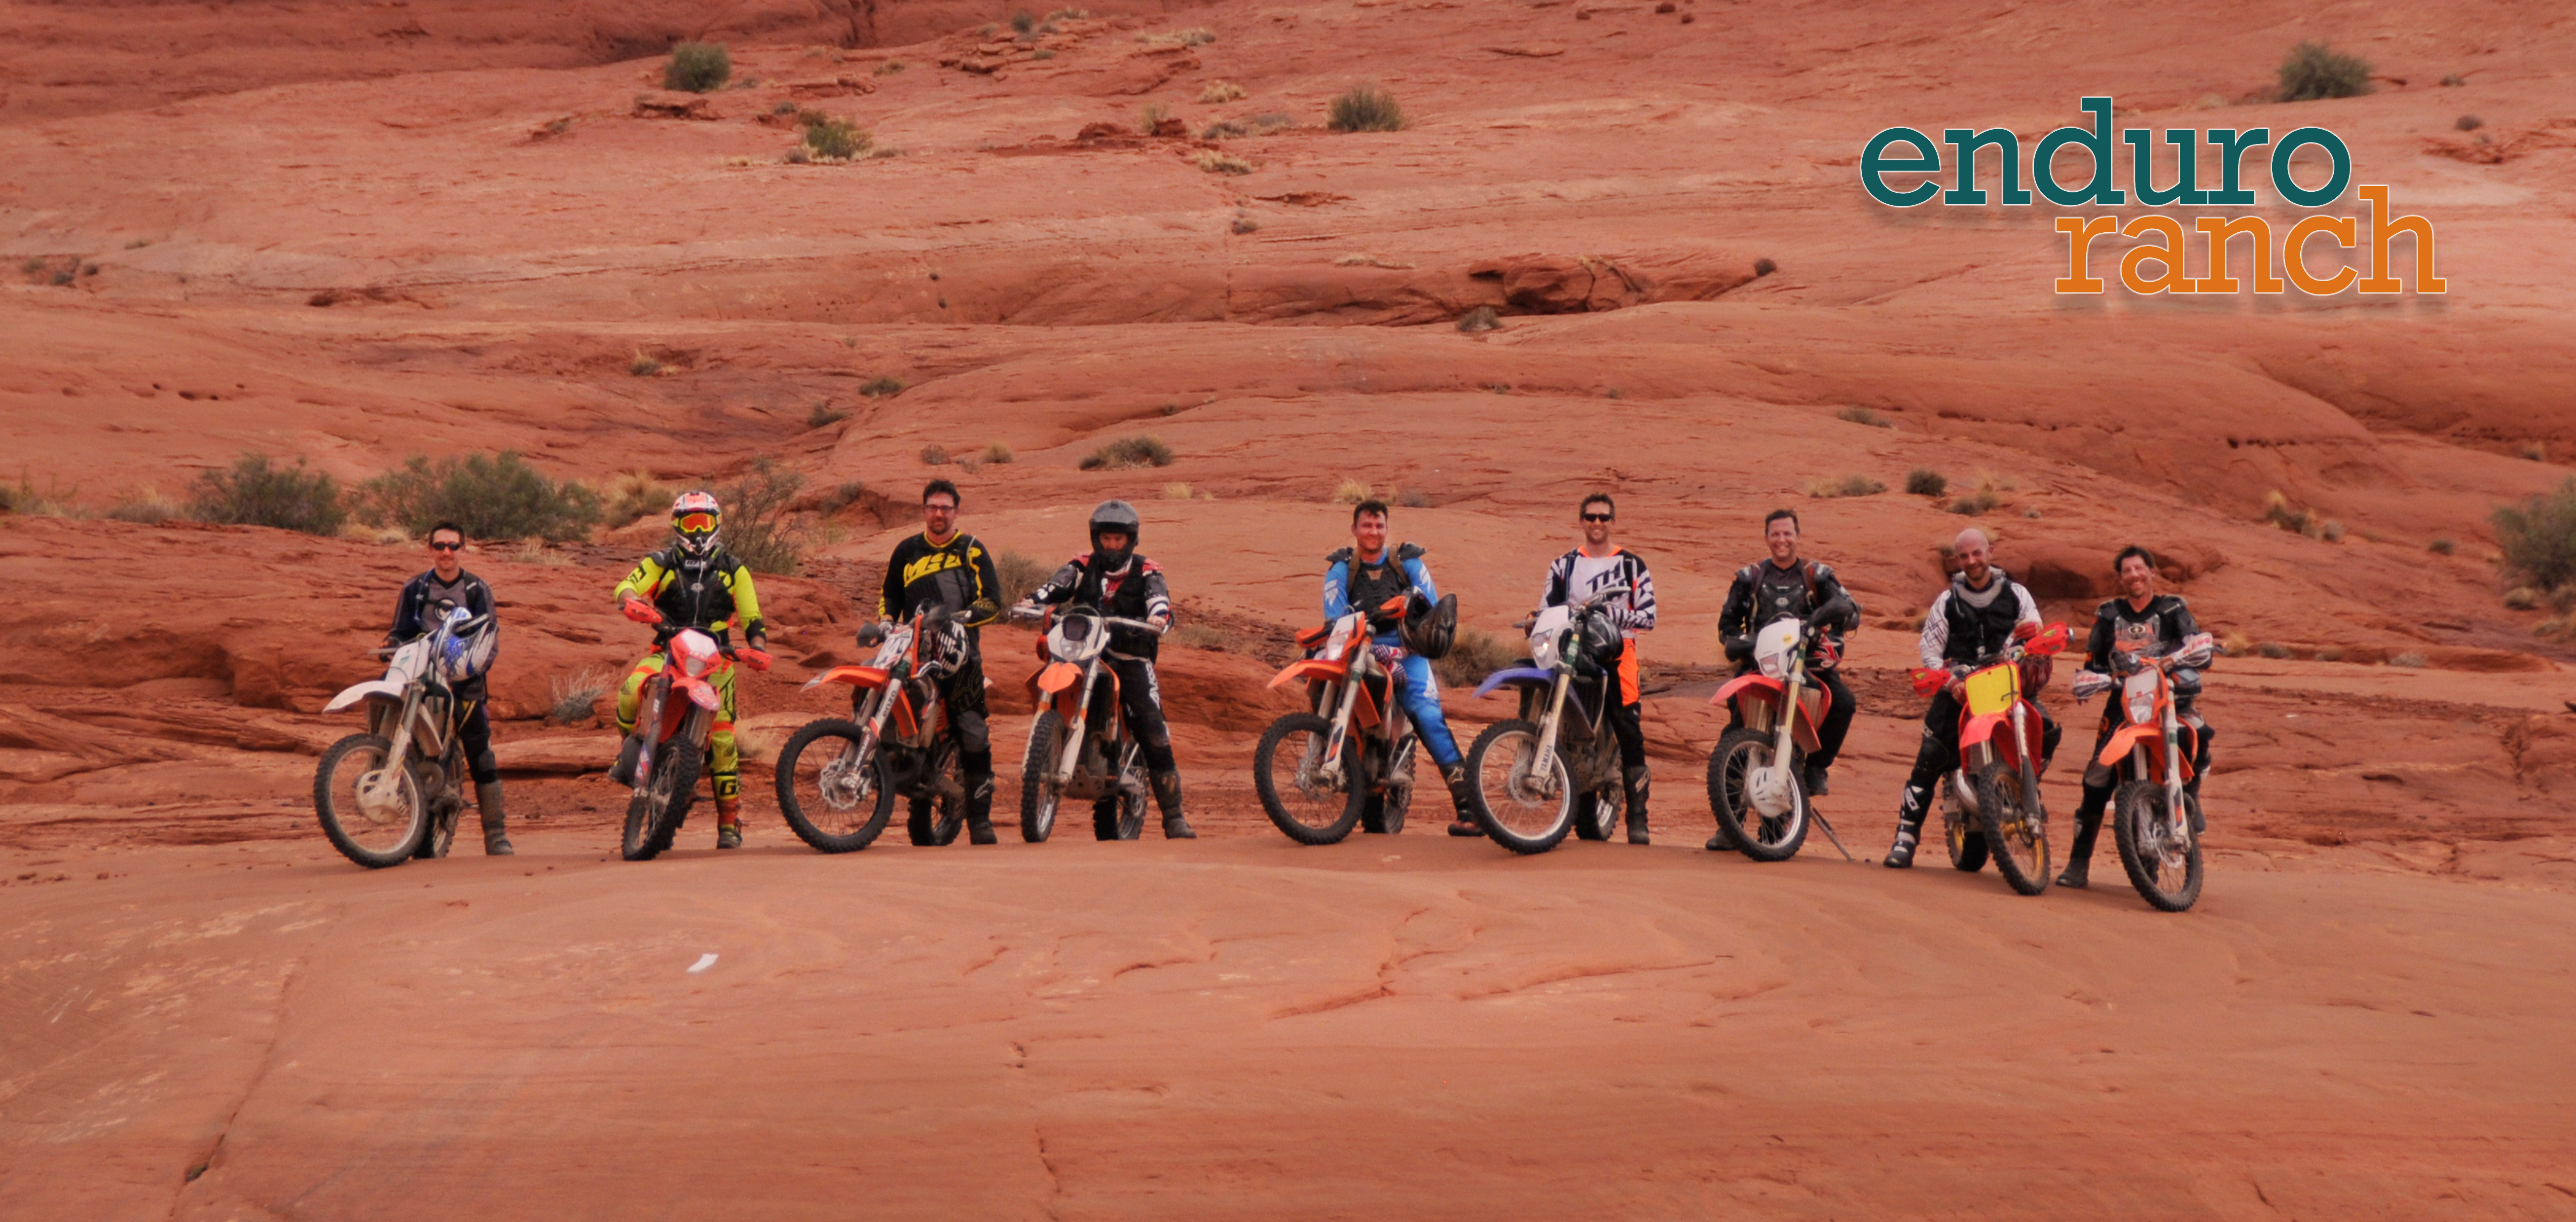 Shot of 9 dirtbike riders lined up on domed rock far away from camera.